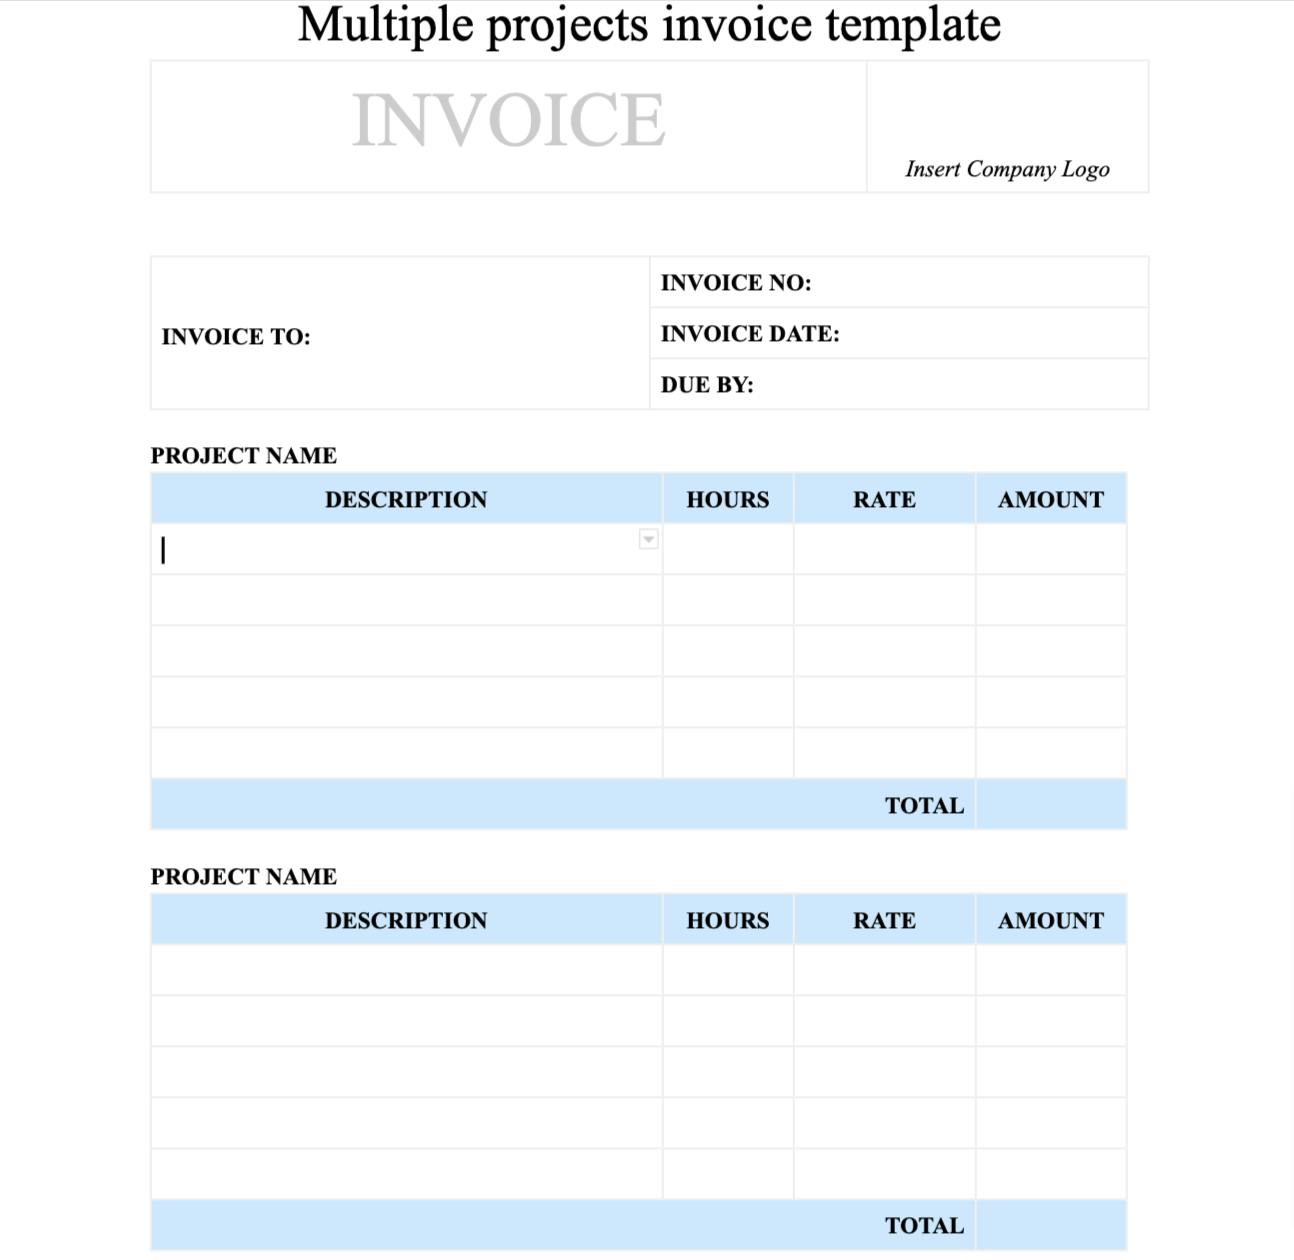 Multiple projects invoice template in google docs